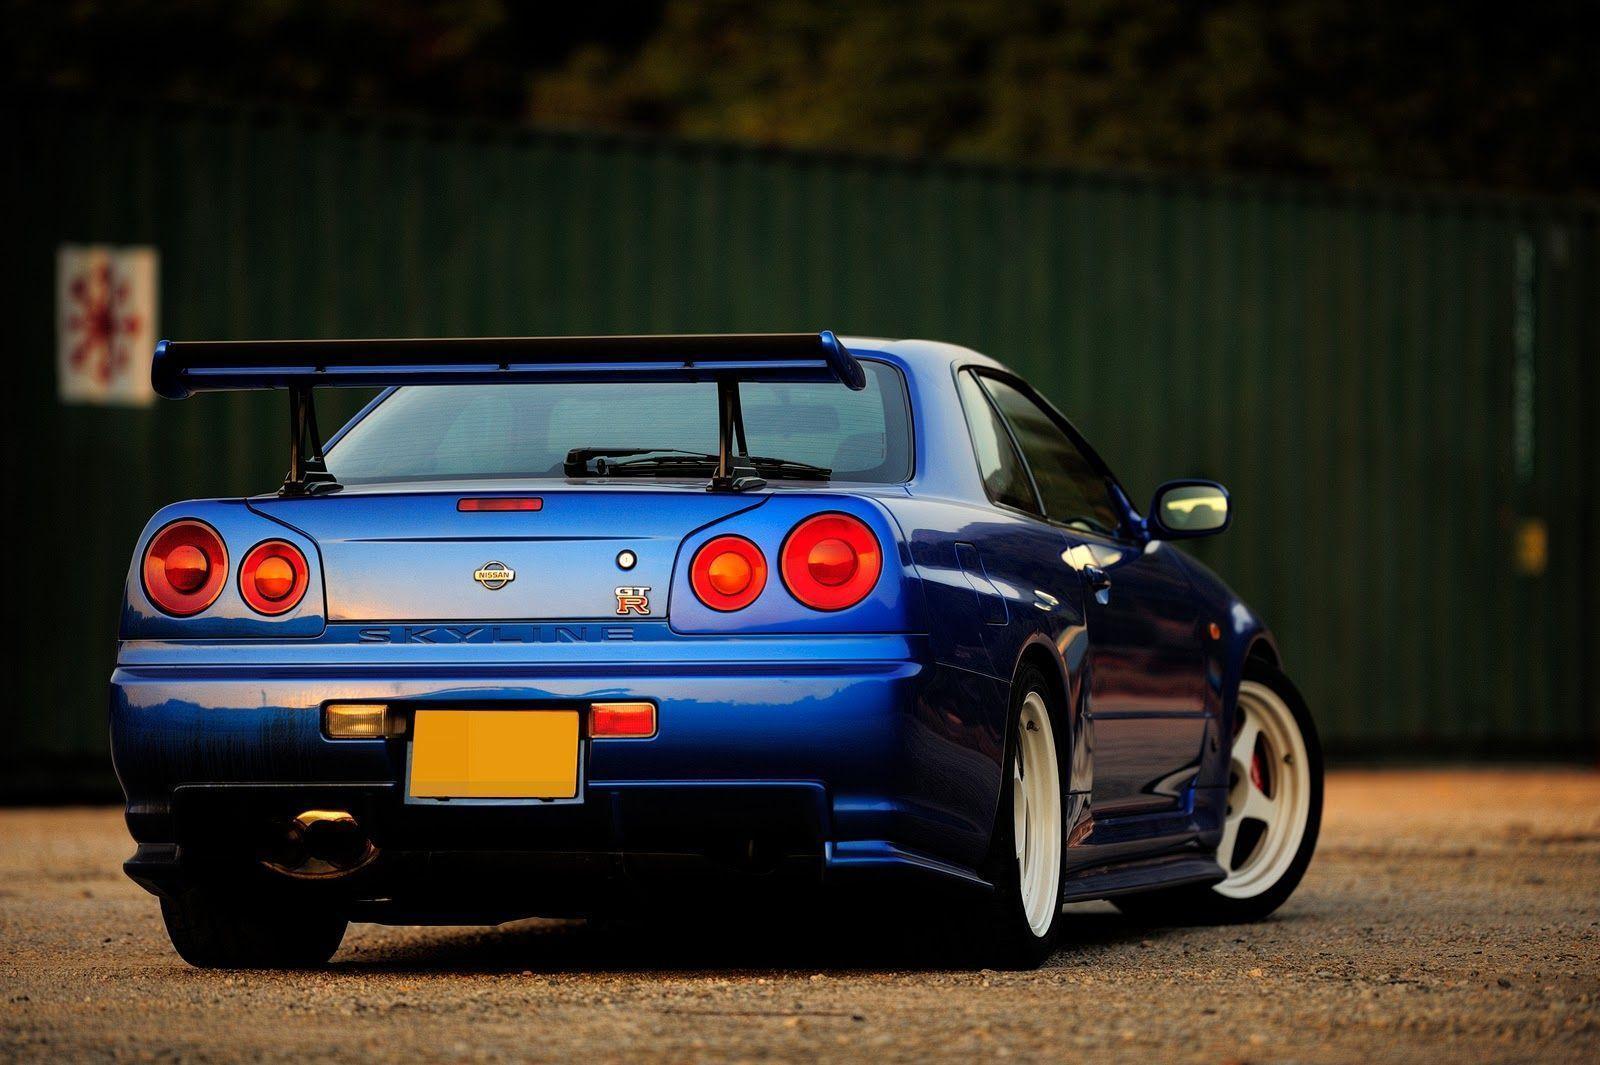 Nissan Skyline Wallpaper Group with items. HD Wallpaper